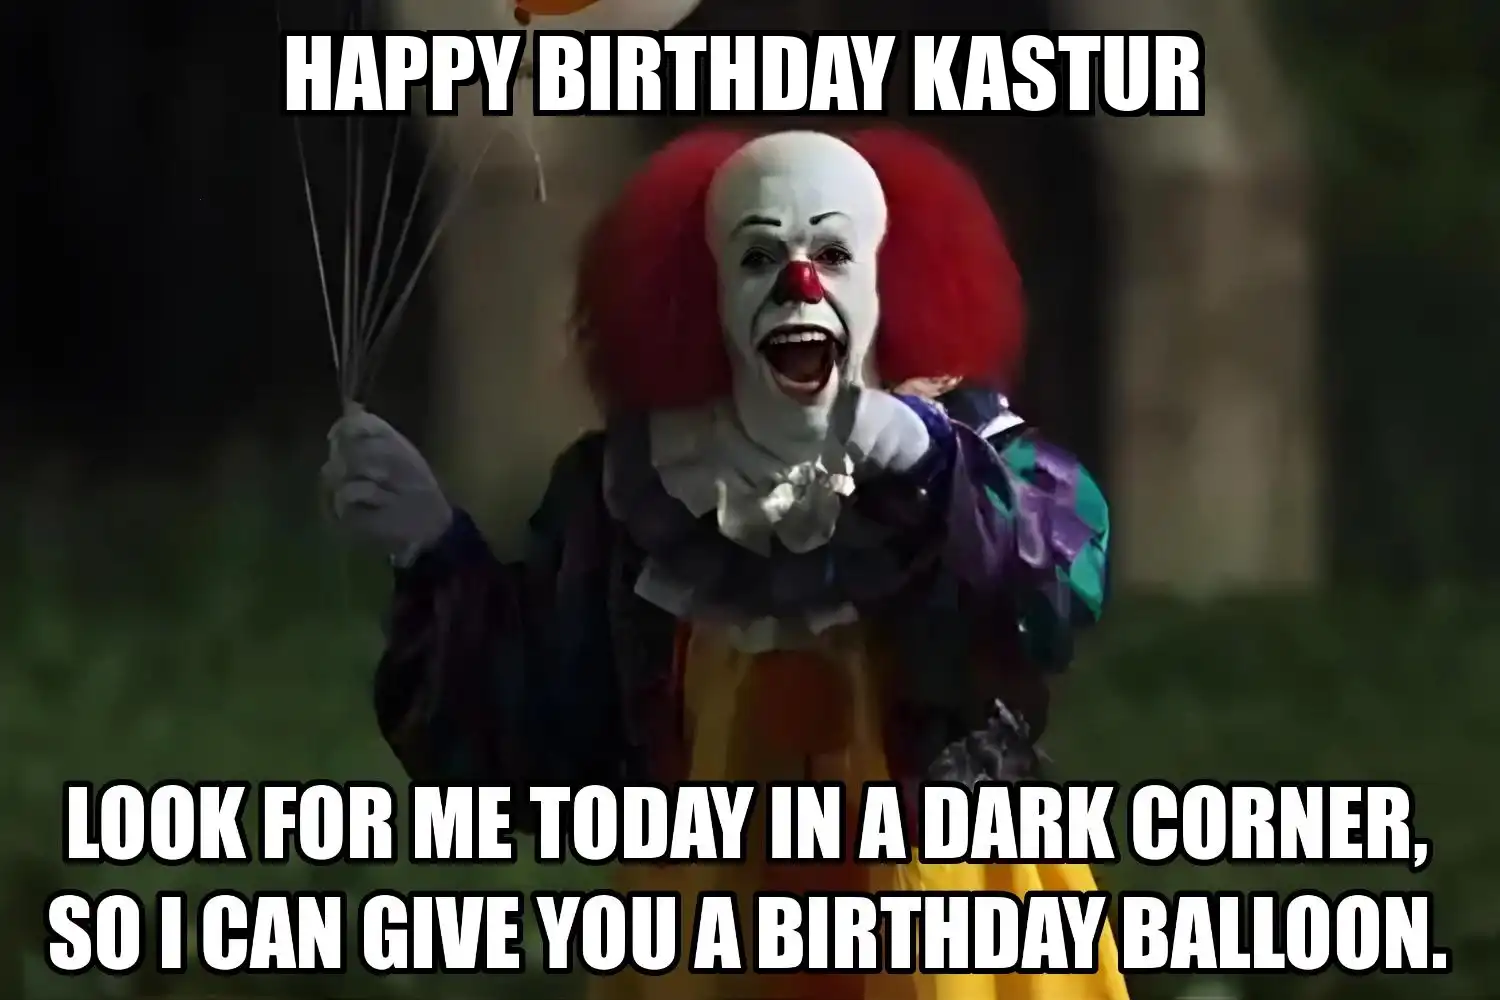 Happy Birthday Kastur I Can Give You A Balloon Meme